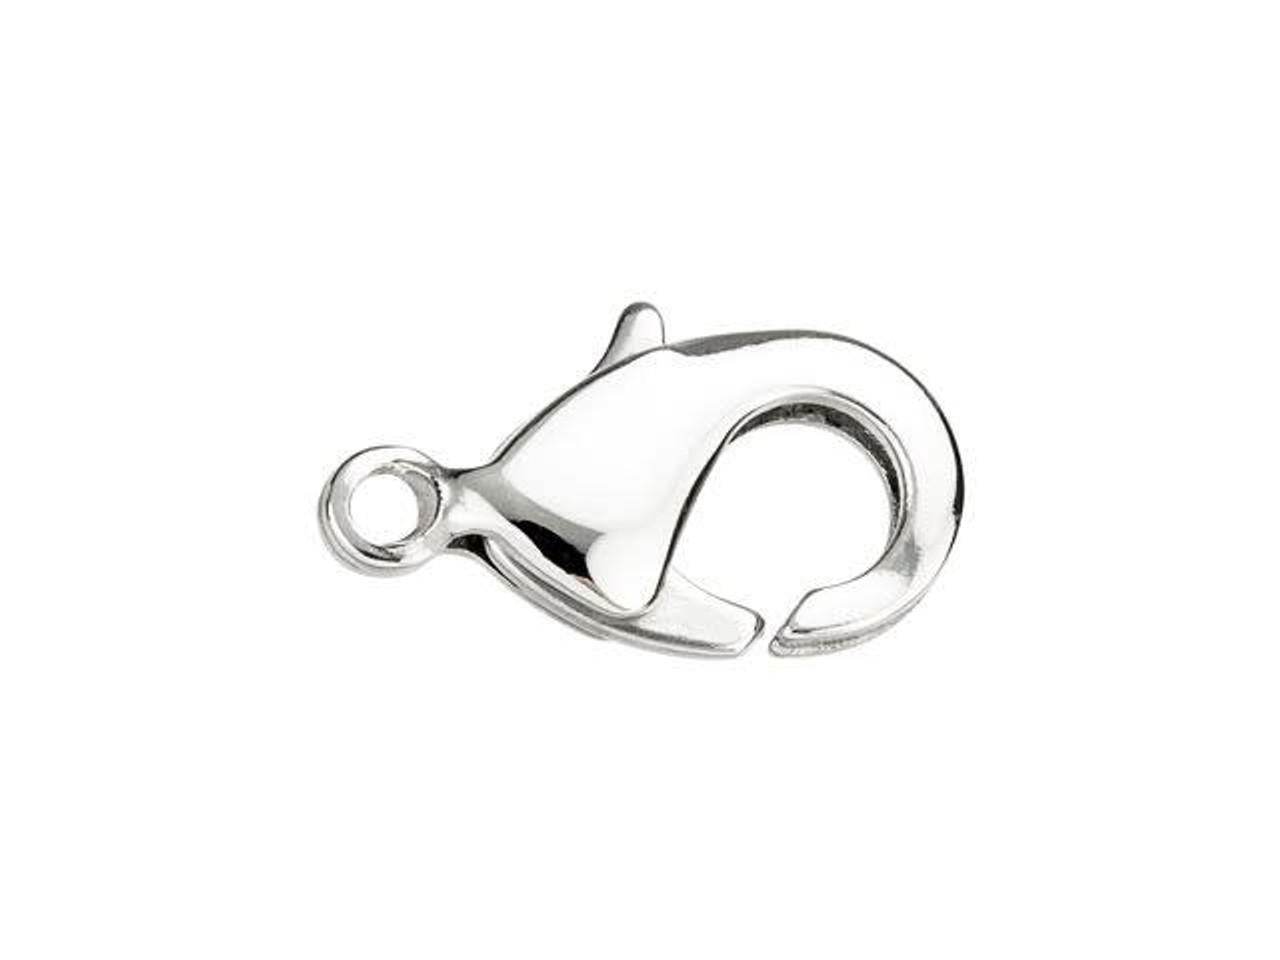 25 10mm Stainless Steel Lobster Clasps for Jewelry Making 